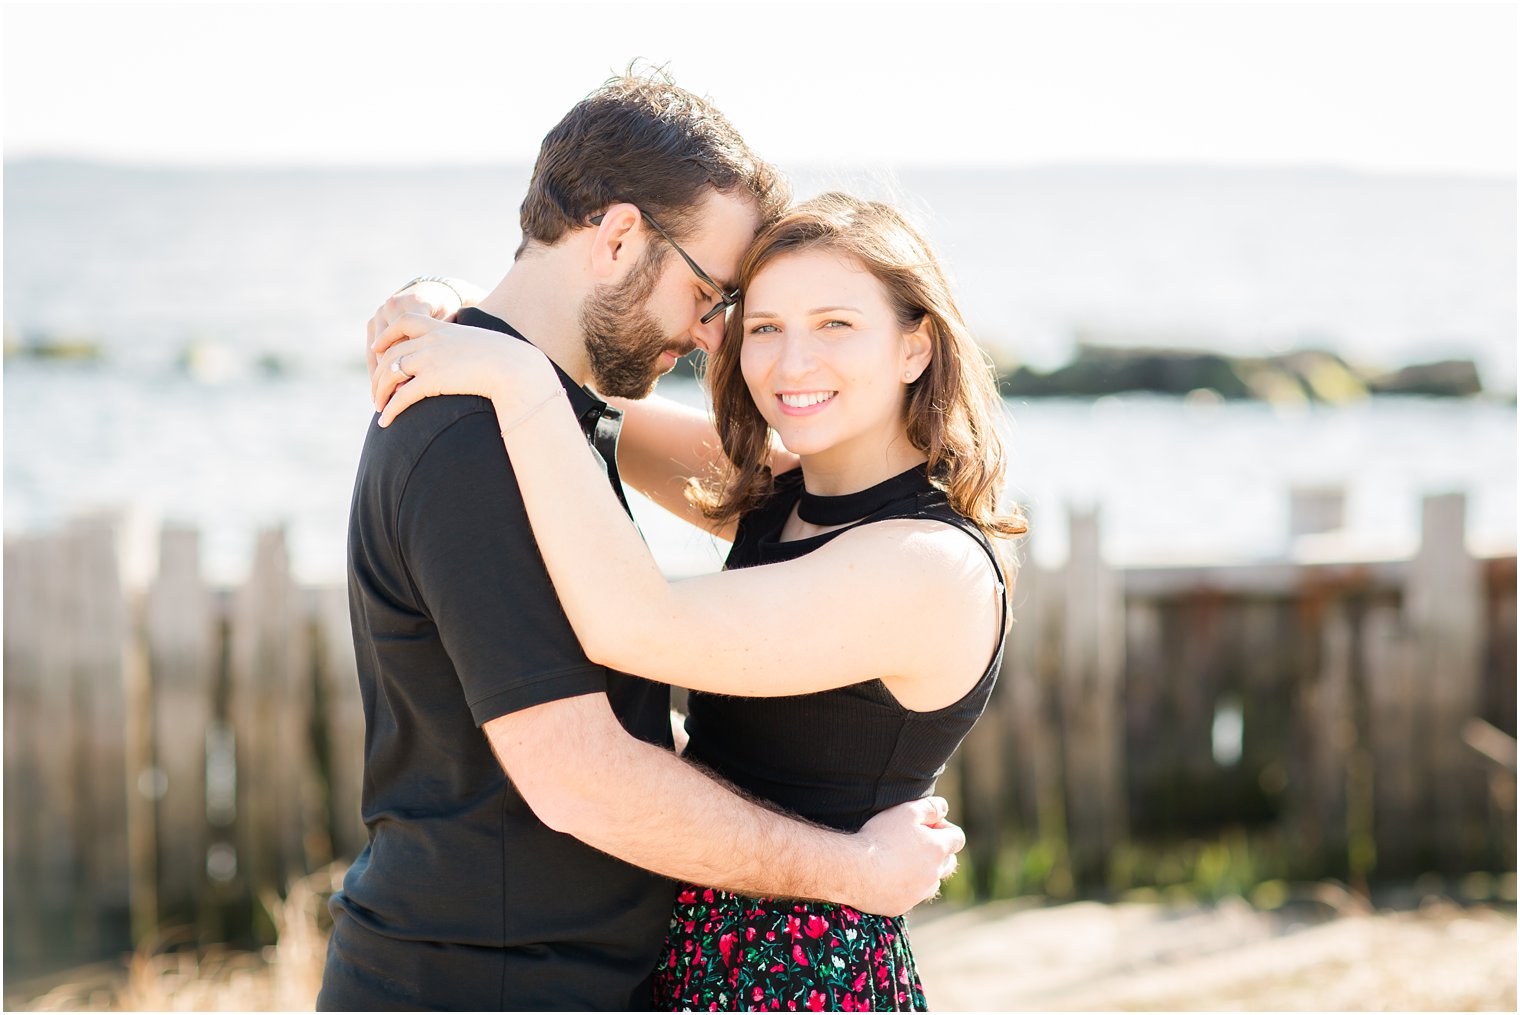 Posing ideas for engagement sessions